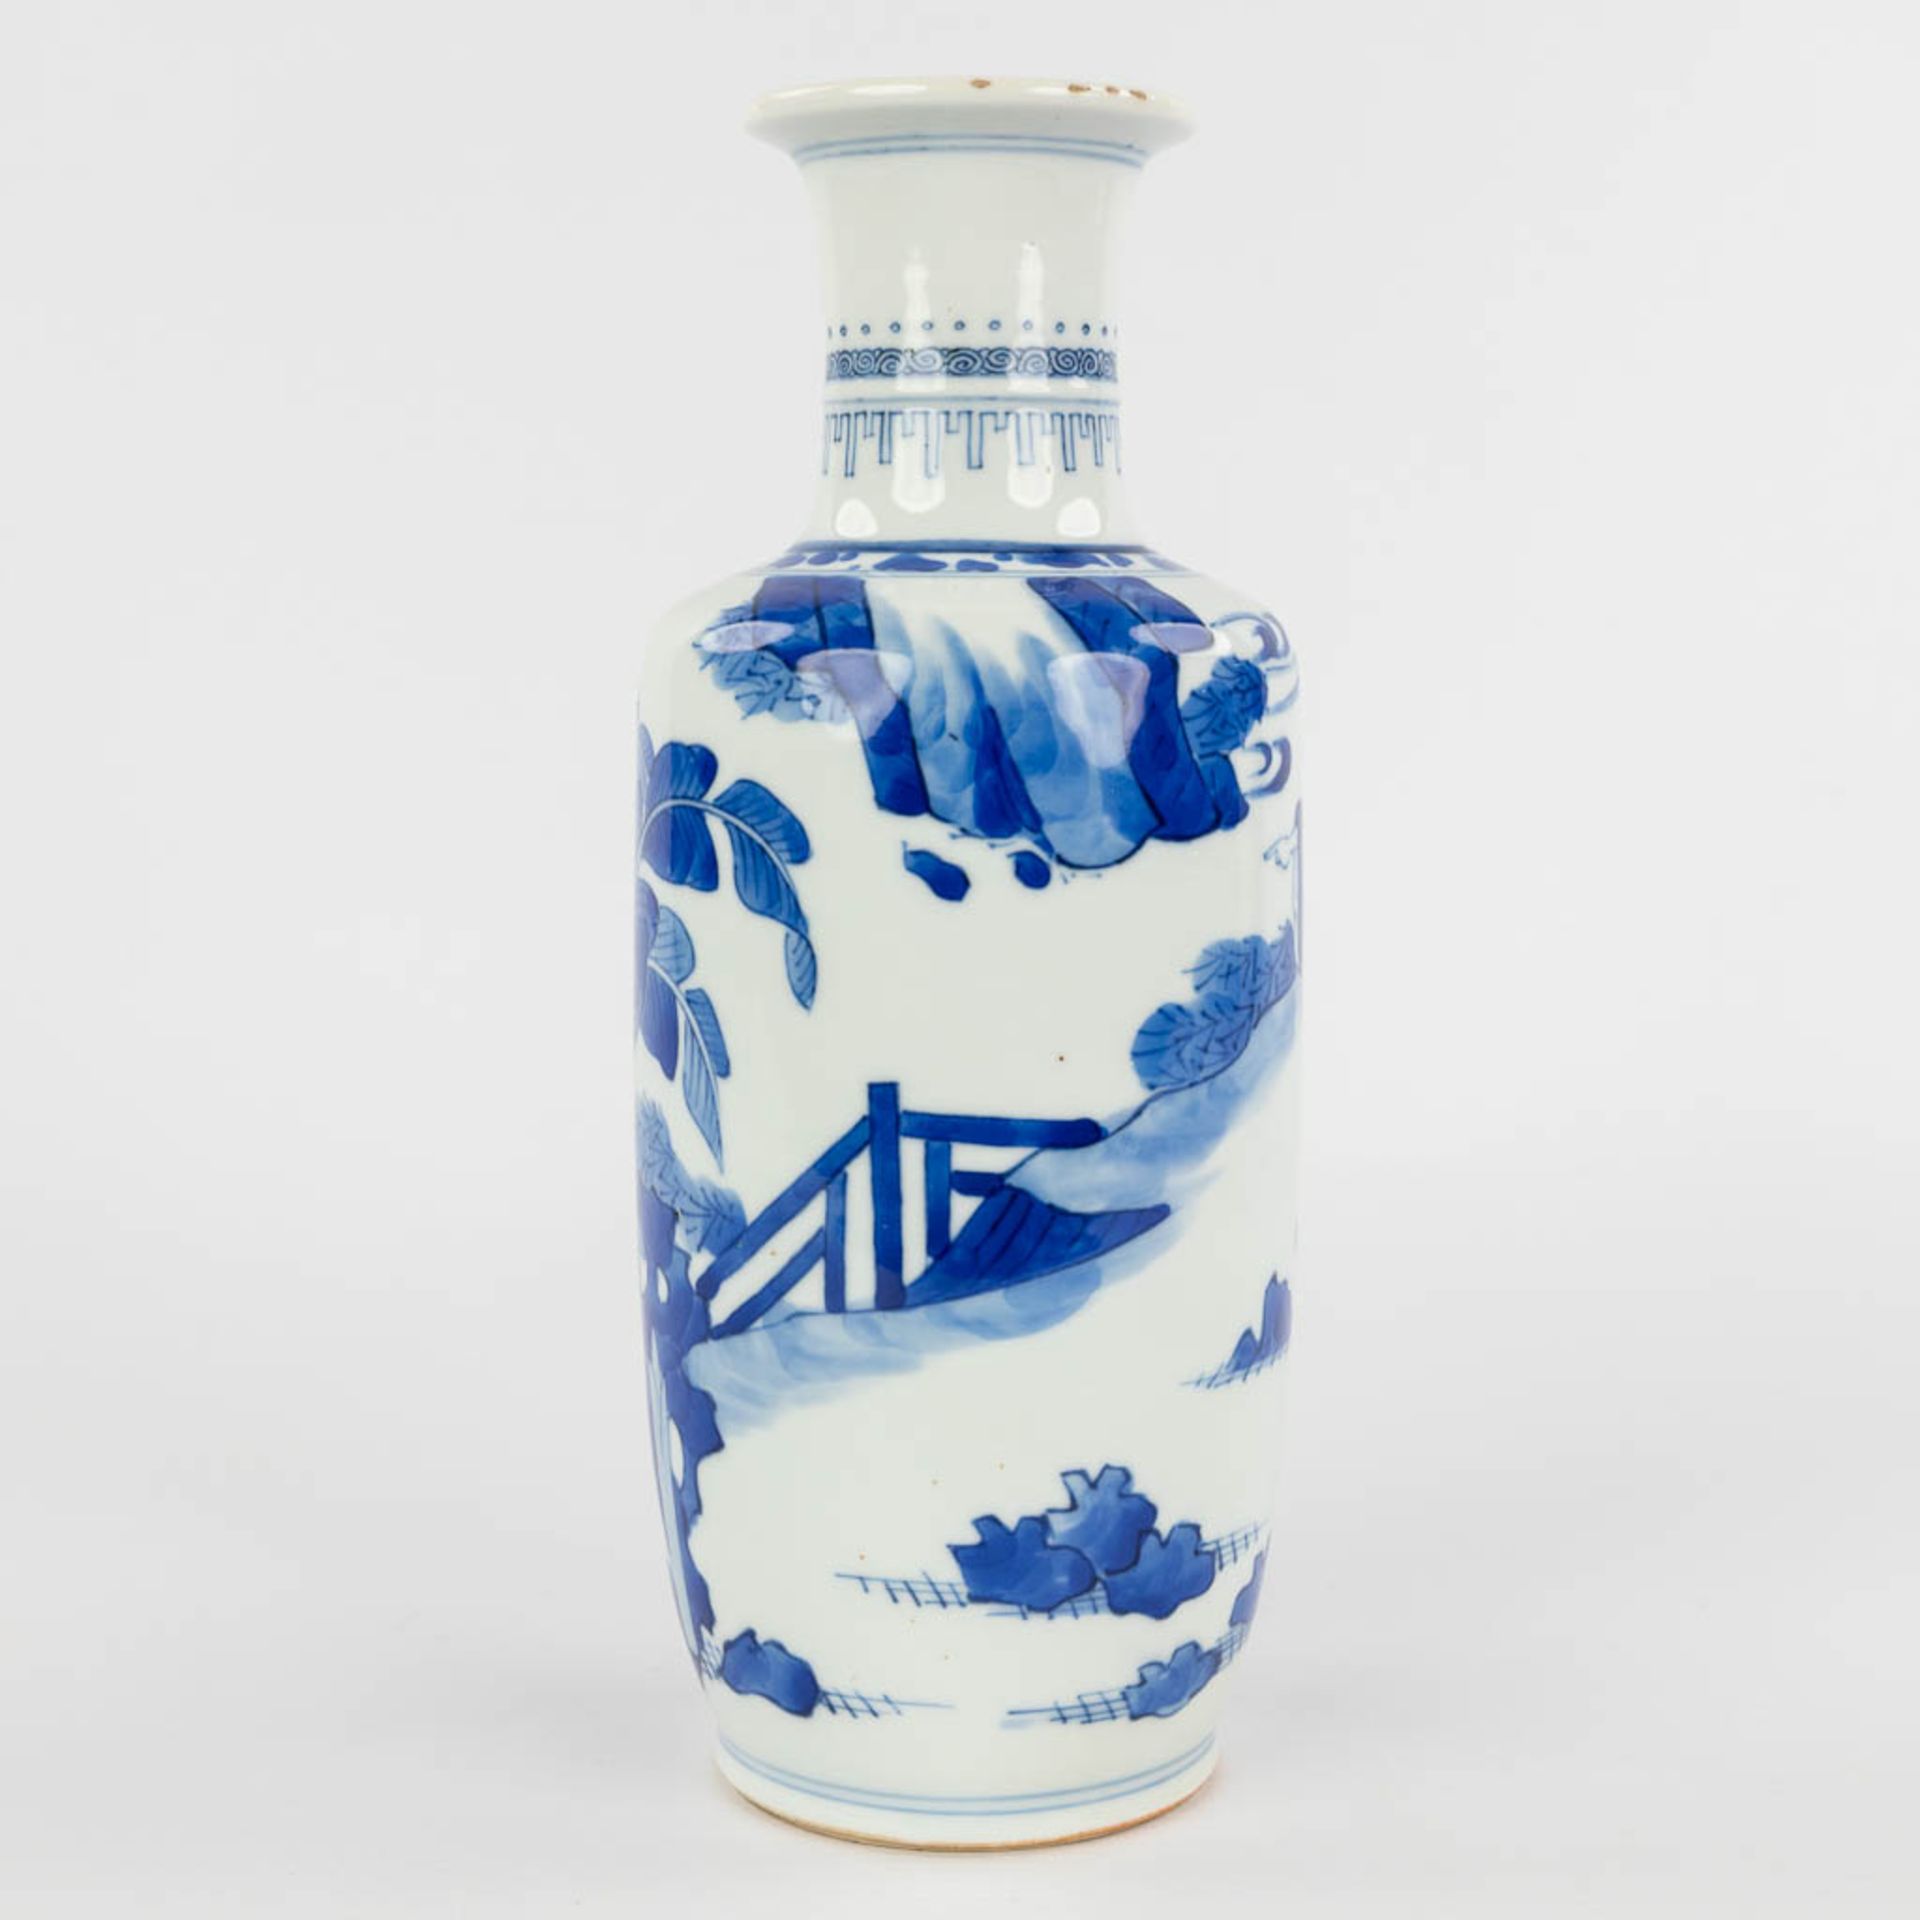 A Chinese vase decorated with blue-white figurines, Kangxi period. 18th C. (H:26 x D:10 cm) - Bild 4 aus 12